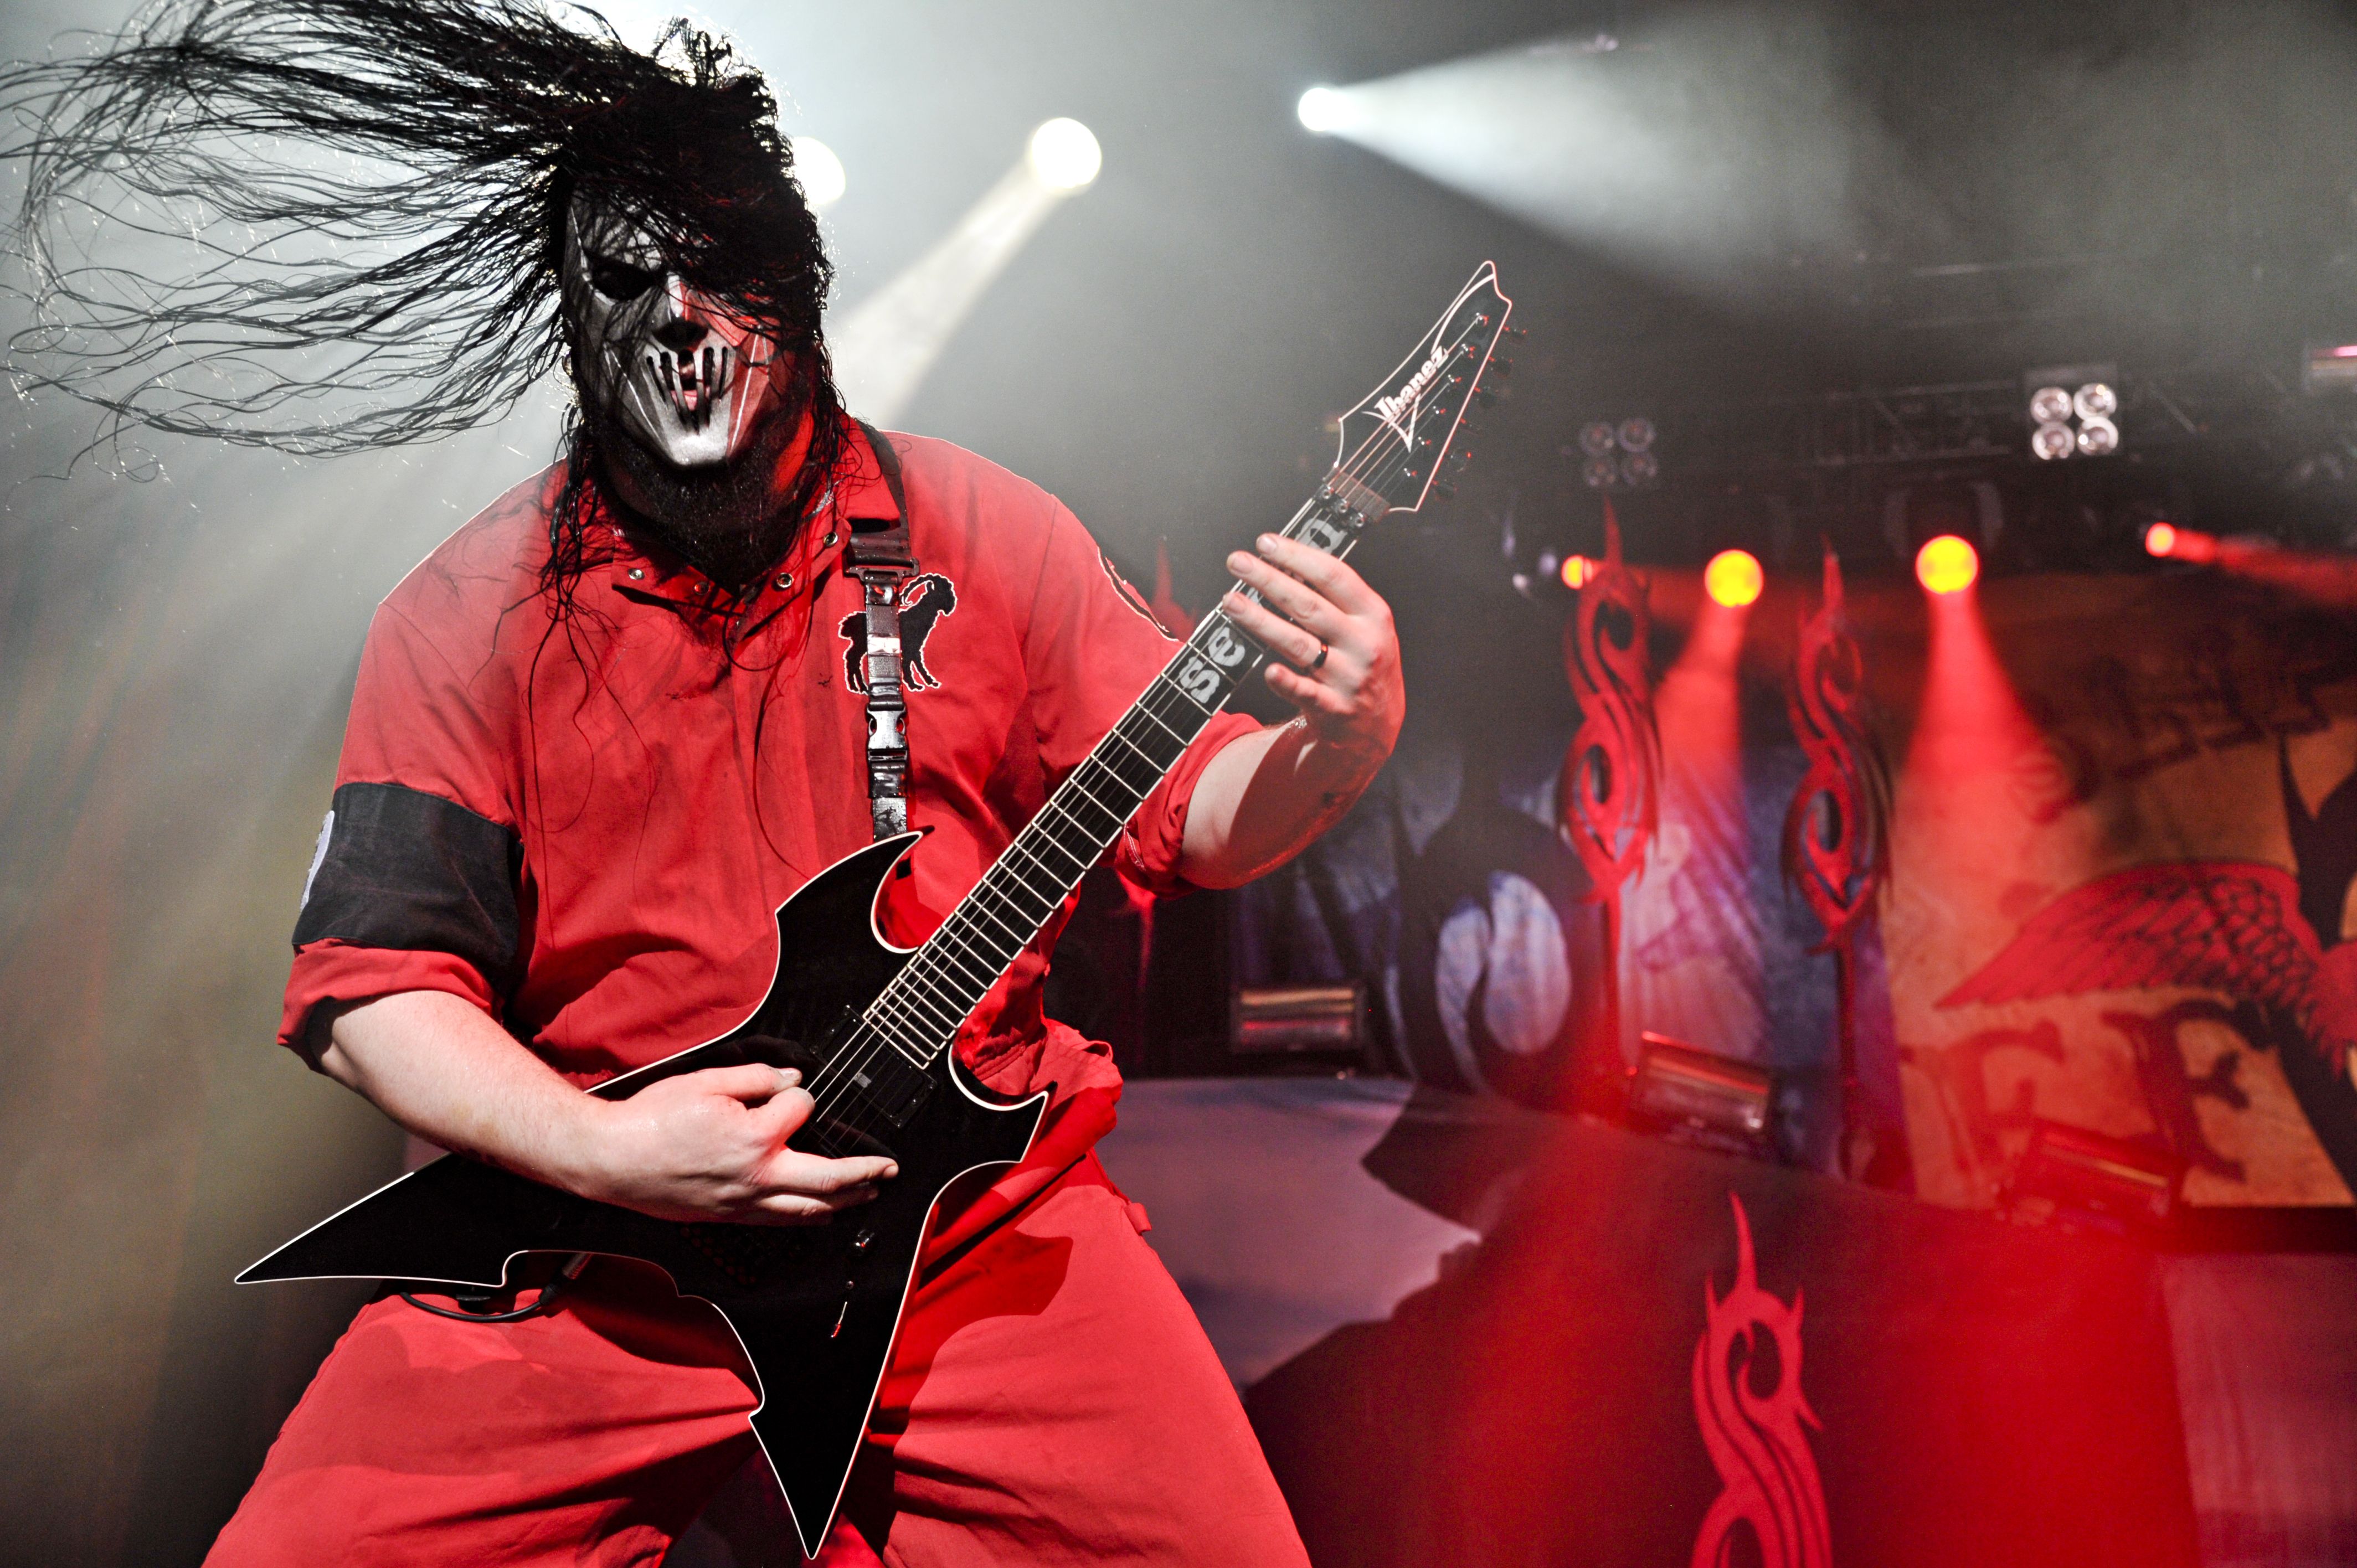 Slipknot's Mick Thomson and Jim Root talk gear, tone and being flat